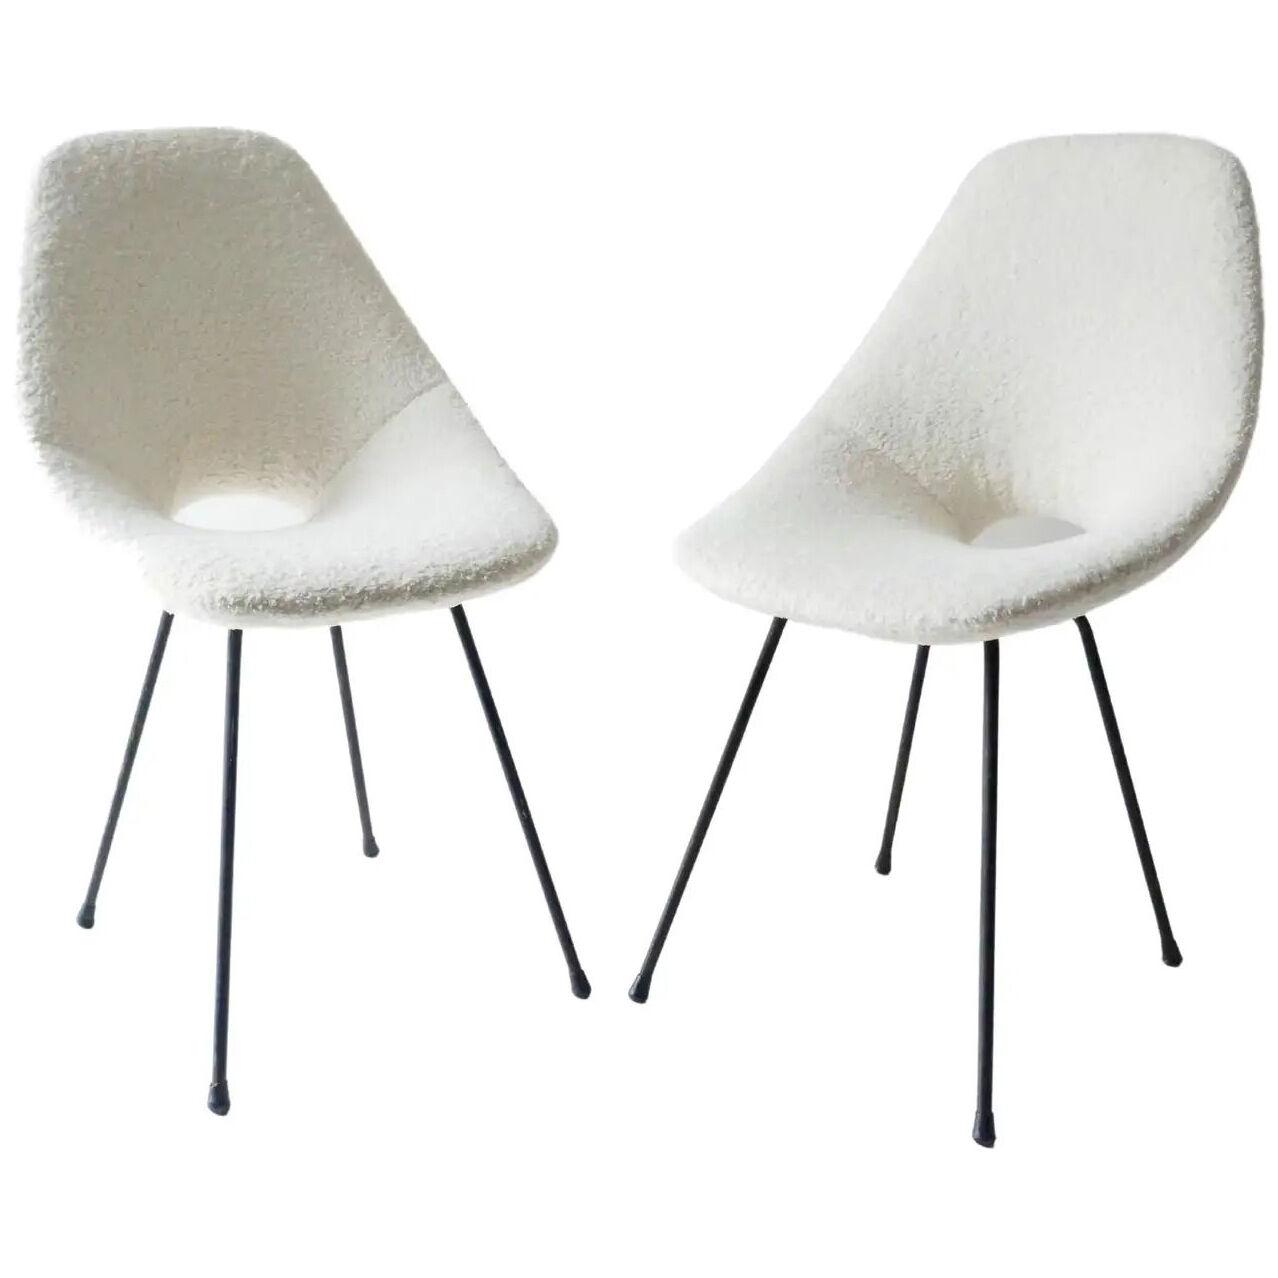 Pair of Medea Chairs in White Boucle, Black Metal Legs, Italy, 1950s